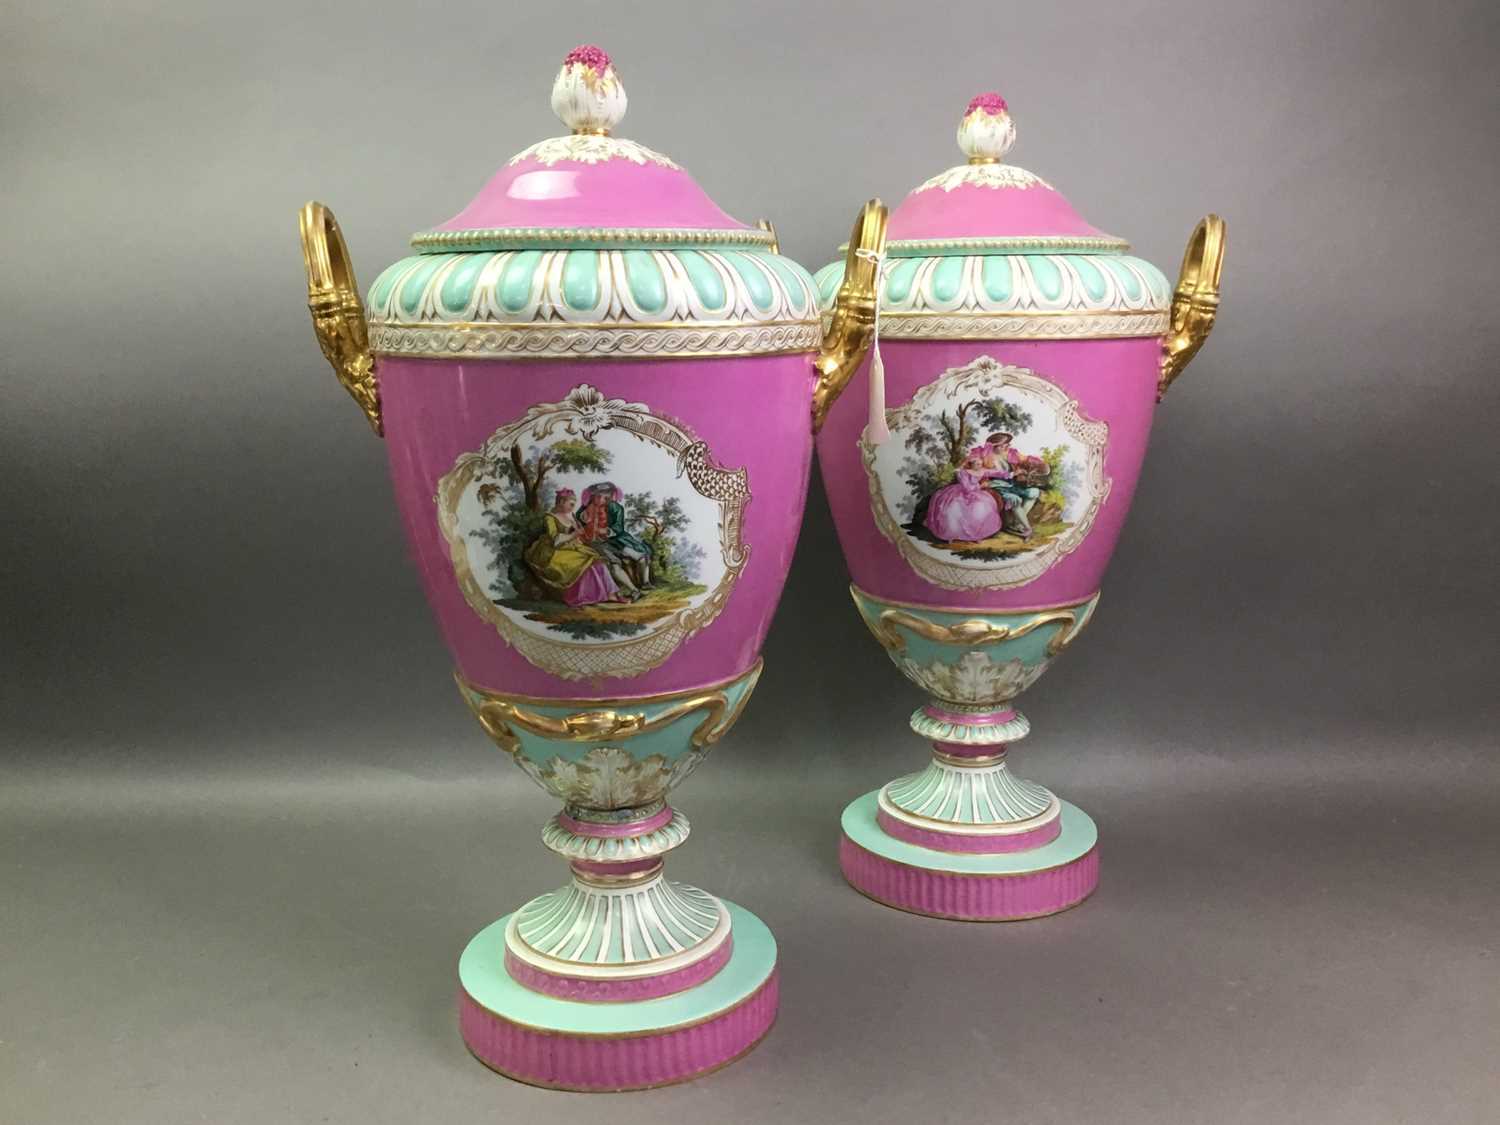 PAIR OF BERLIN PORCELAIN URN SHAPED VASES LATE 19TH CENTURY